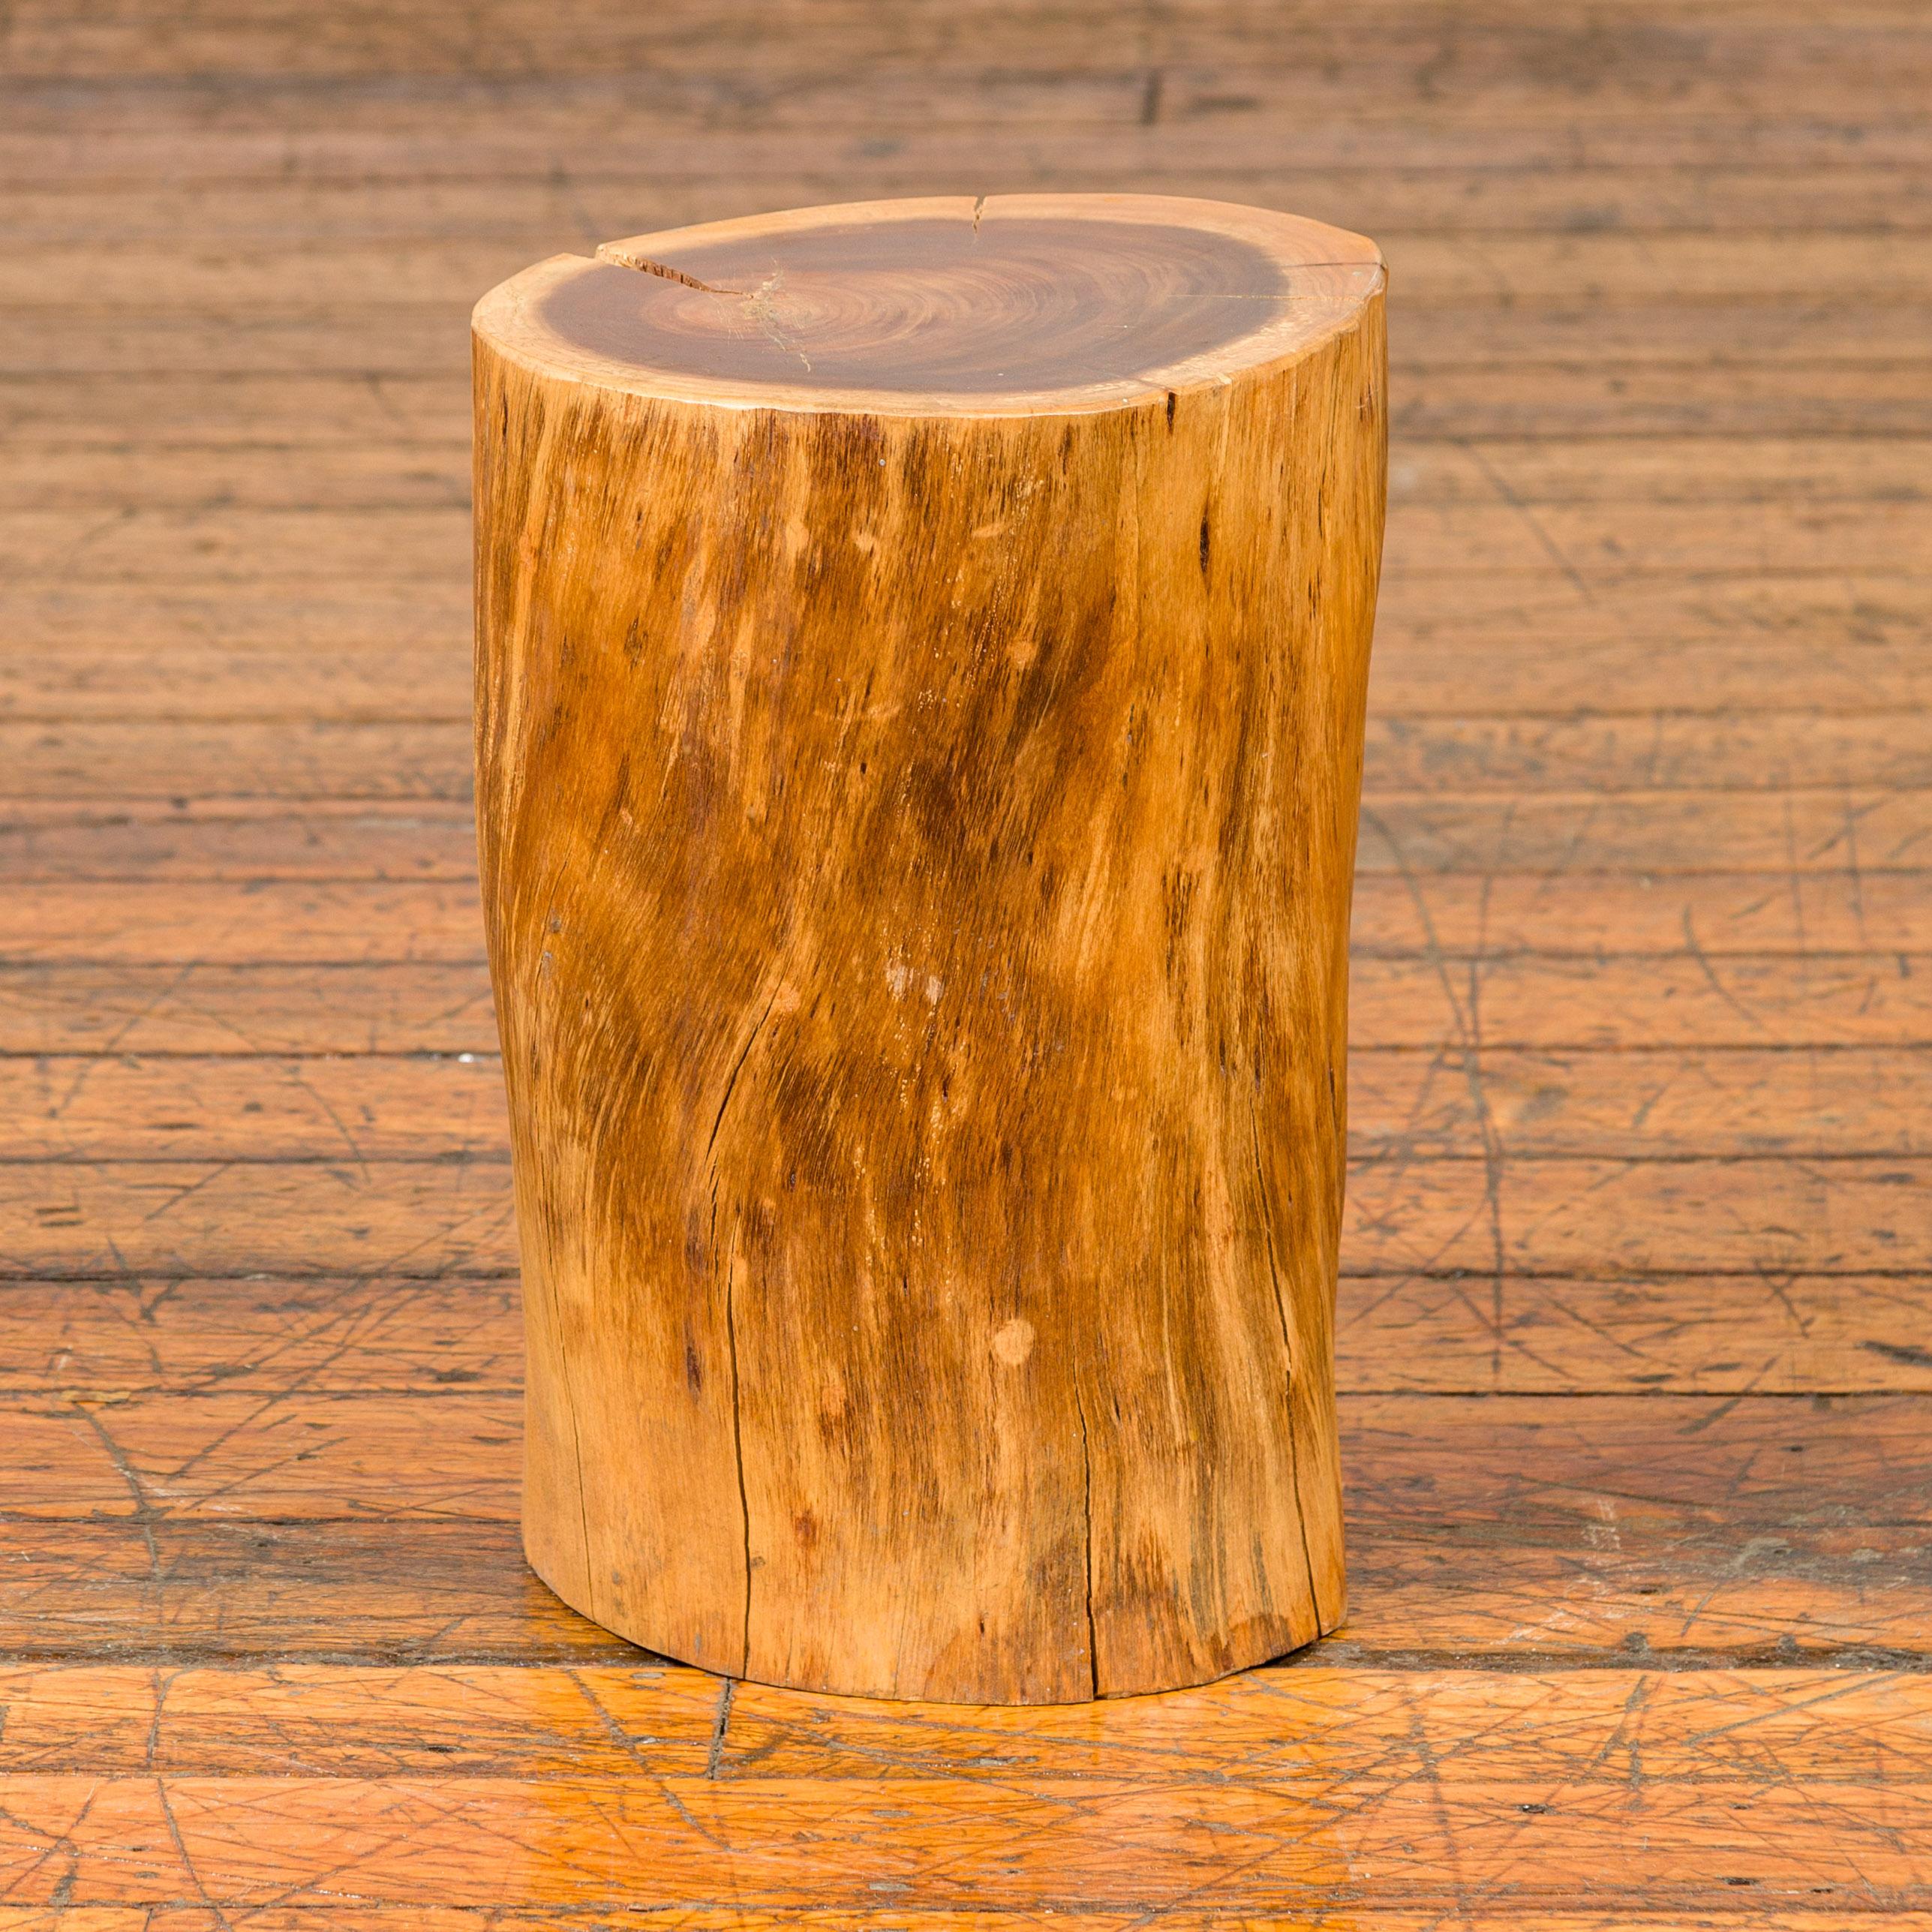 A rustic Thai vintage tree stump that can be used as a stool, pedestal or drinks table. This vintage Thai tree stump offers an authentic rustic charm that is both functional and decorative. Crafted from a single, solid piece of wood, this piece